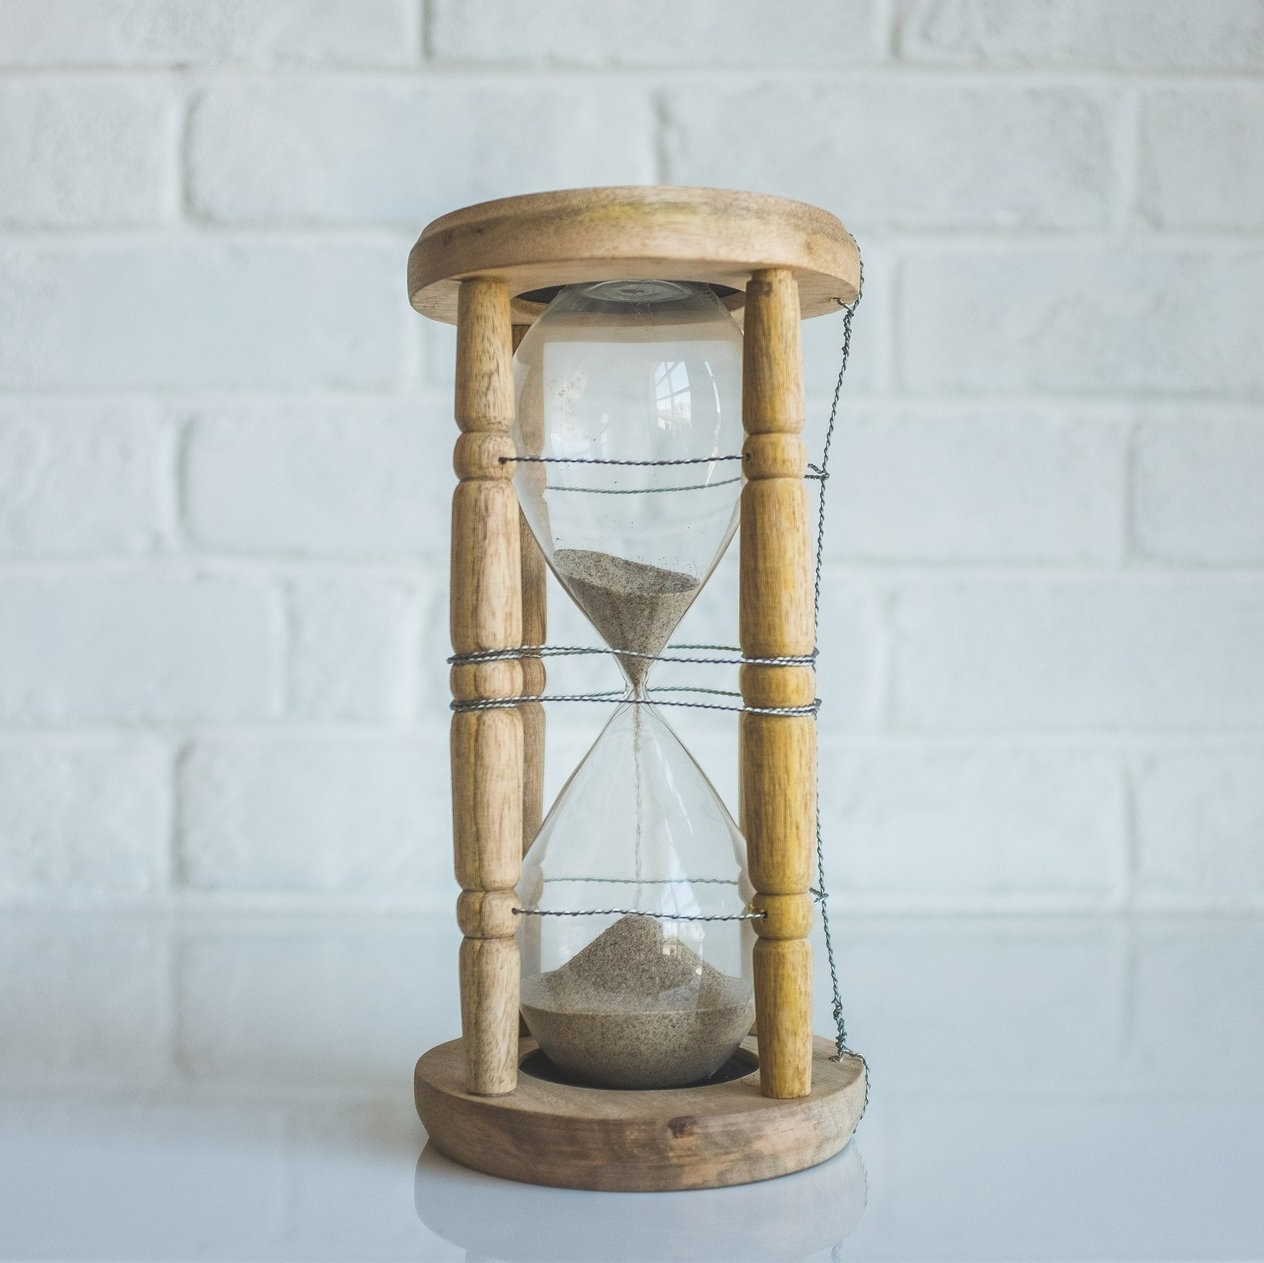 Photograph of a sand timer